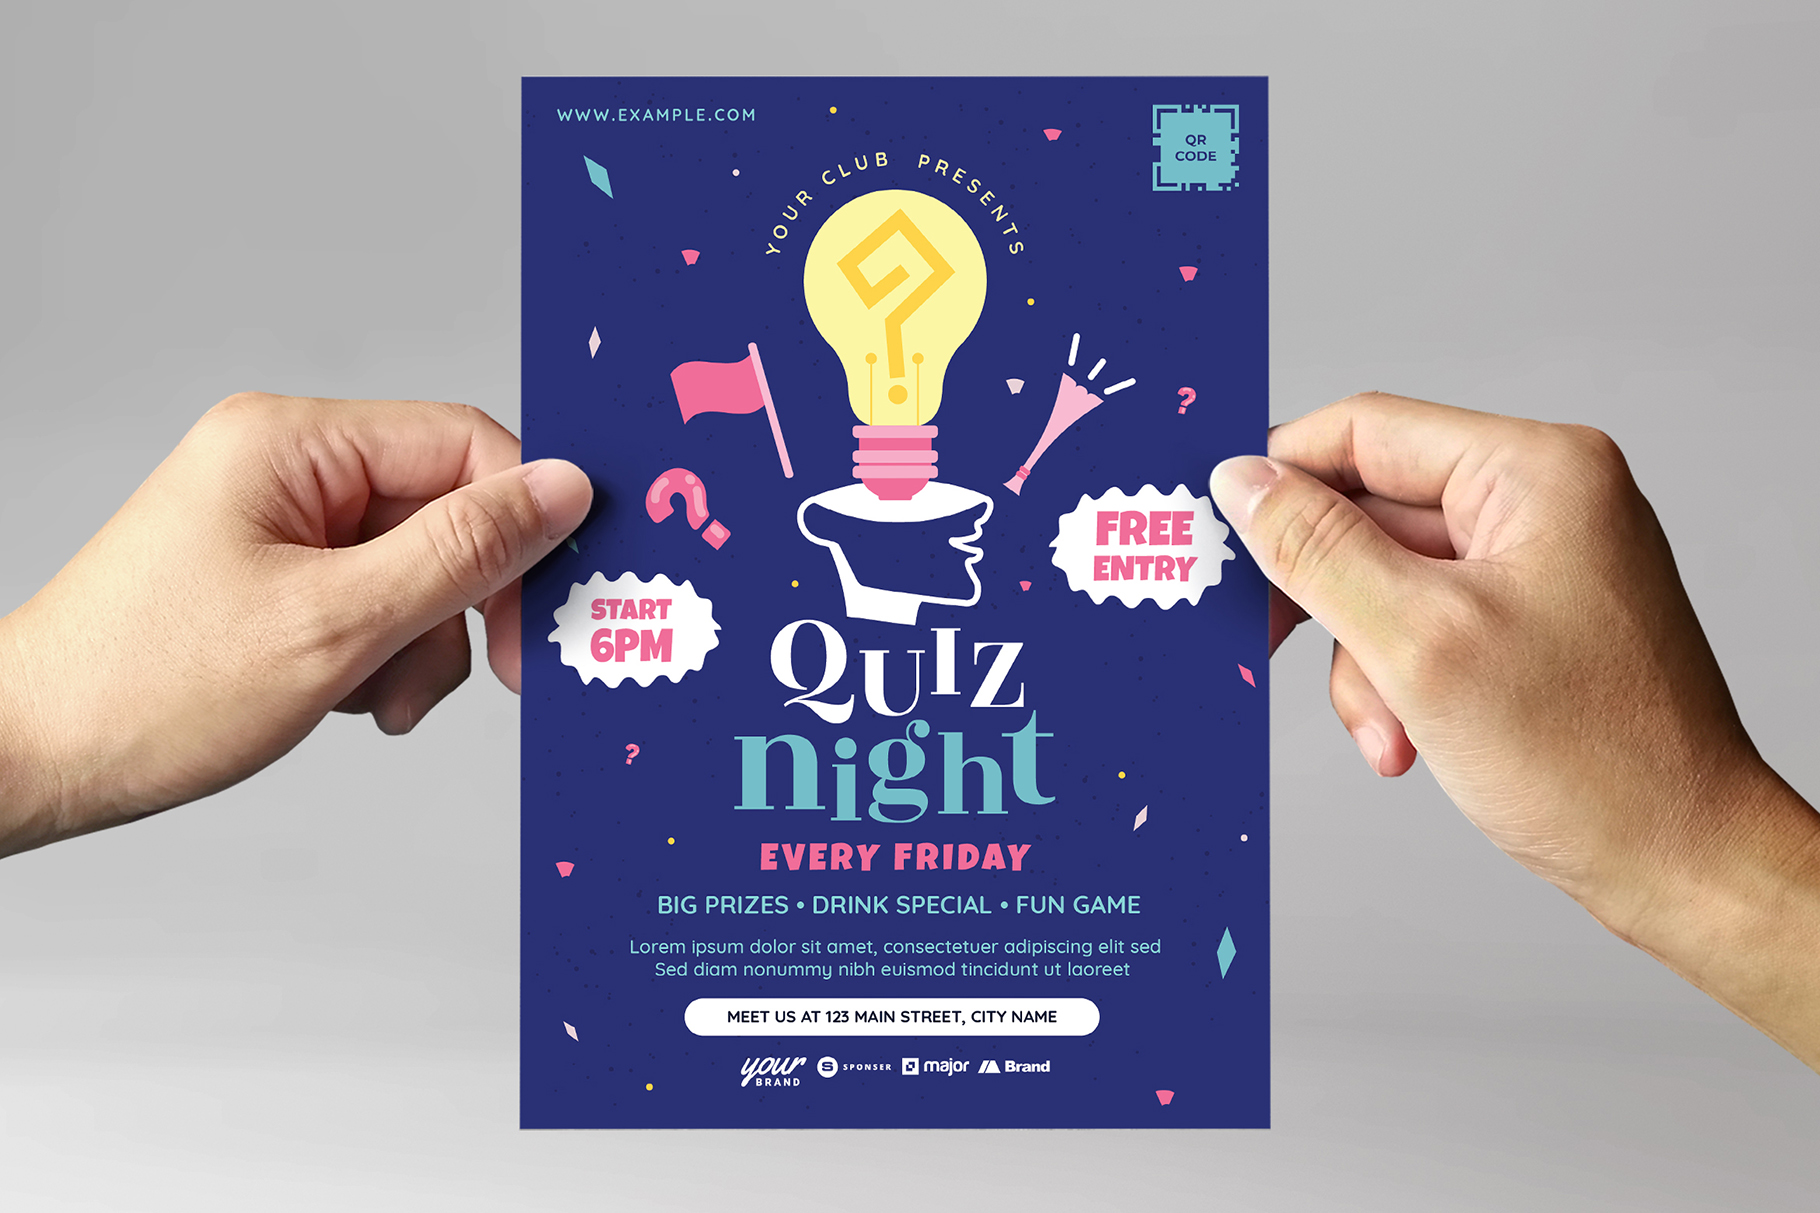 Quiz Night Flyer Template [PSD, Ai, Vector] - BrandPacks Throughout Free Trivia Night Flyer Template